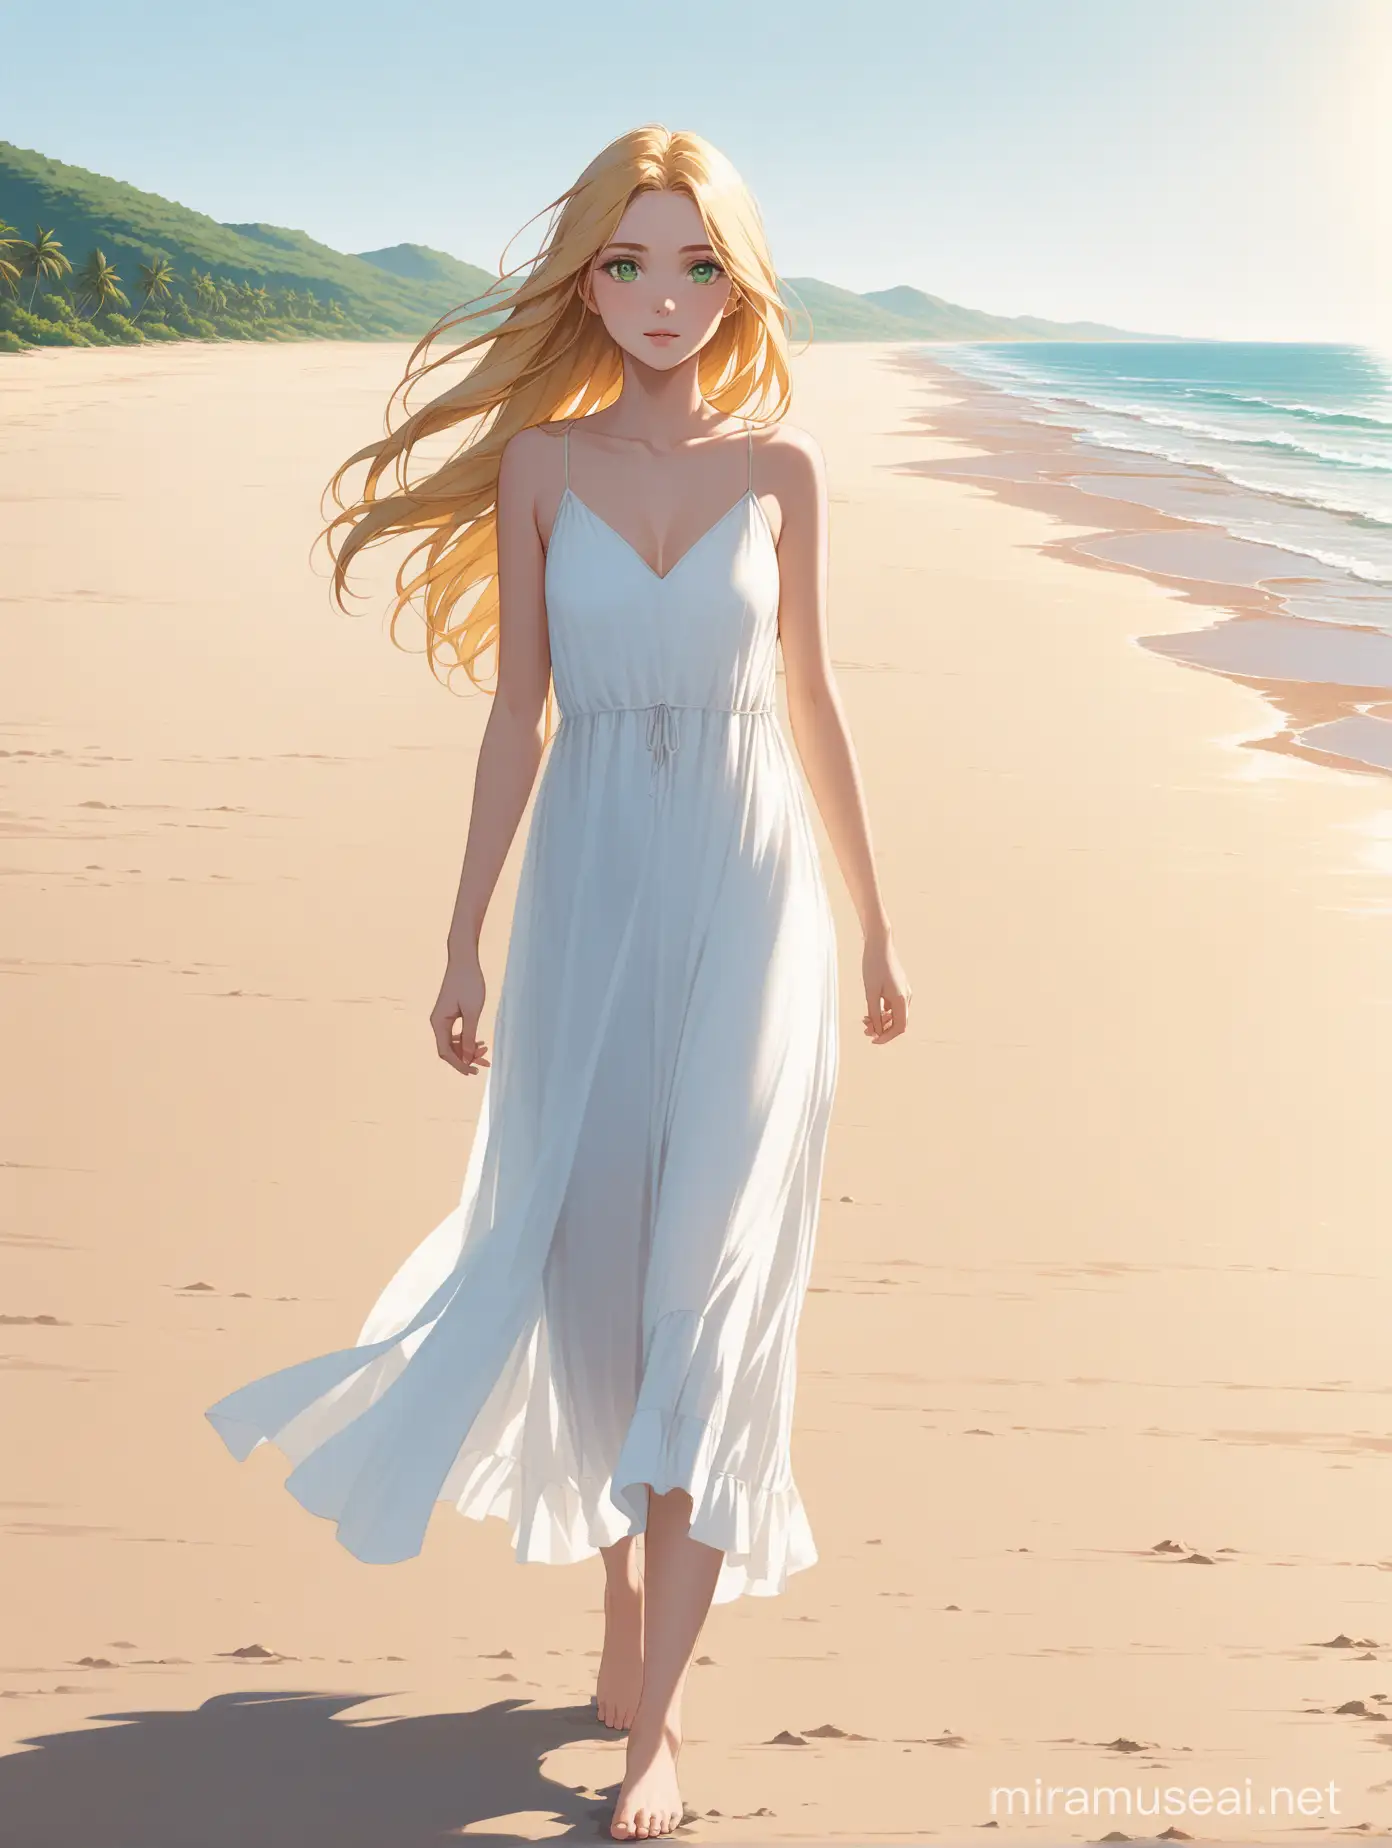 GoldenHaired Woman Strolling Serenely on Deserted Beach